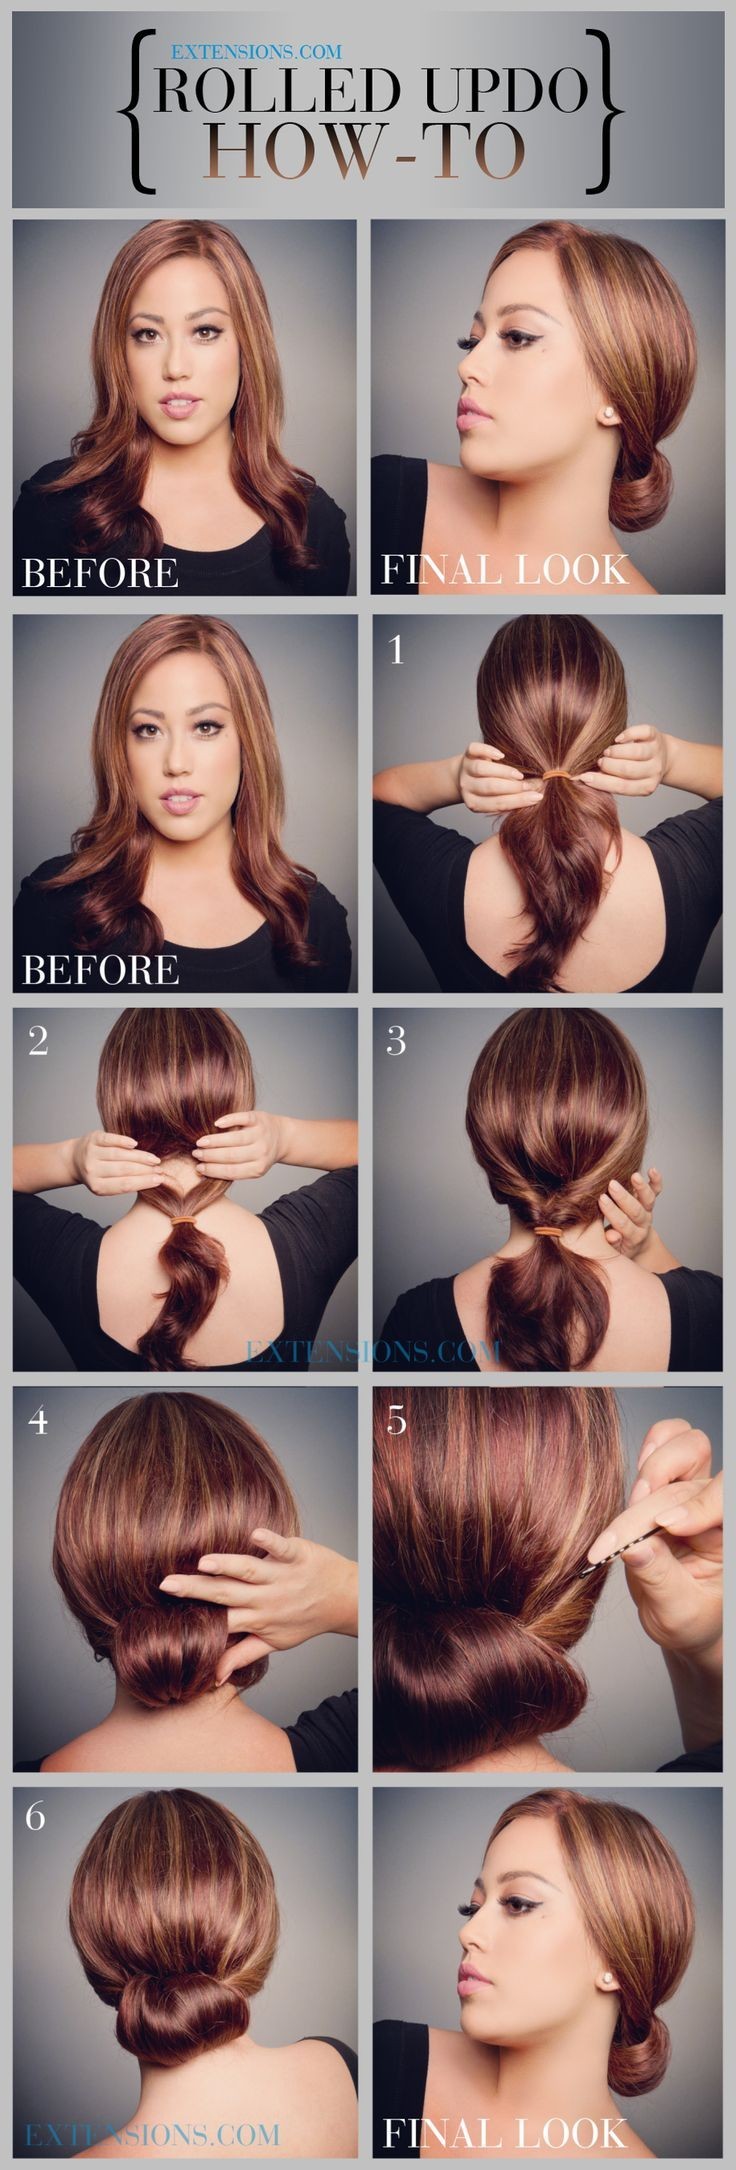 How to: Rolled Updo Hairstyle / Via